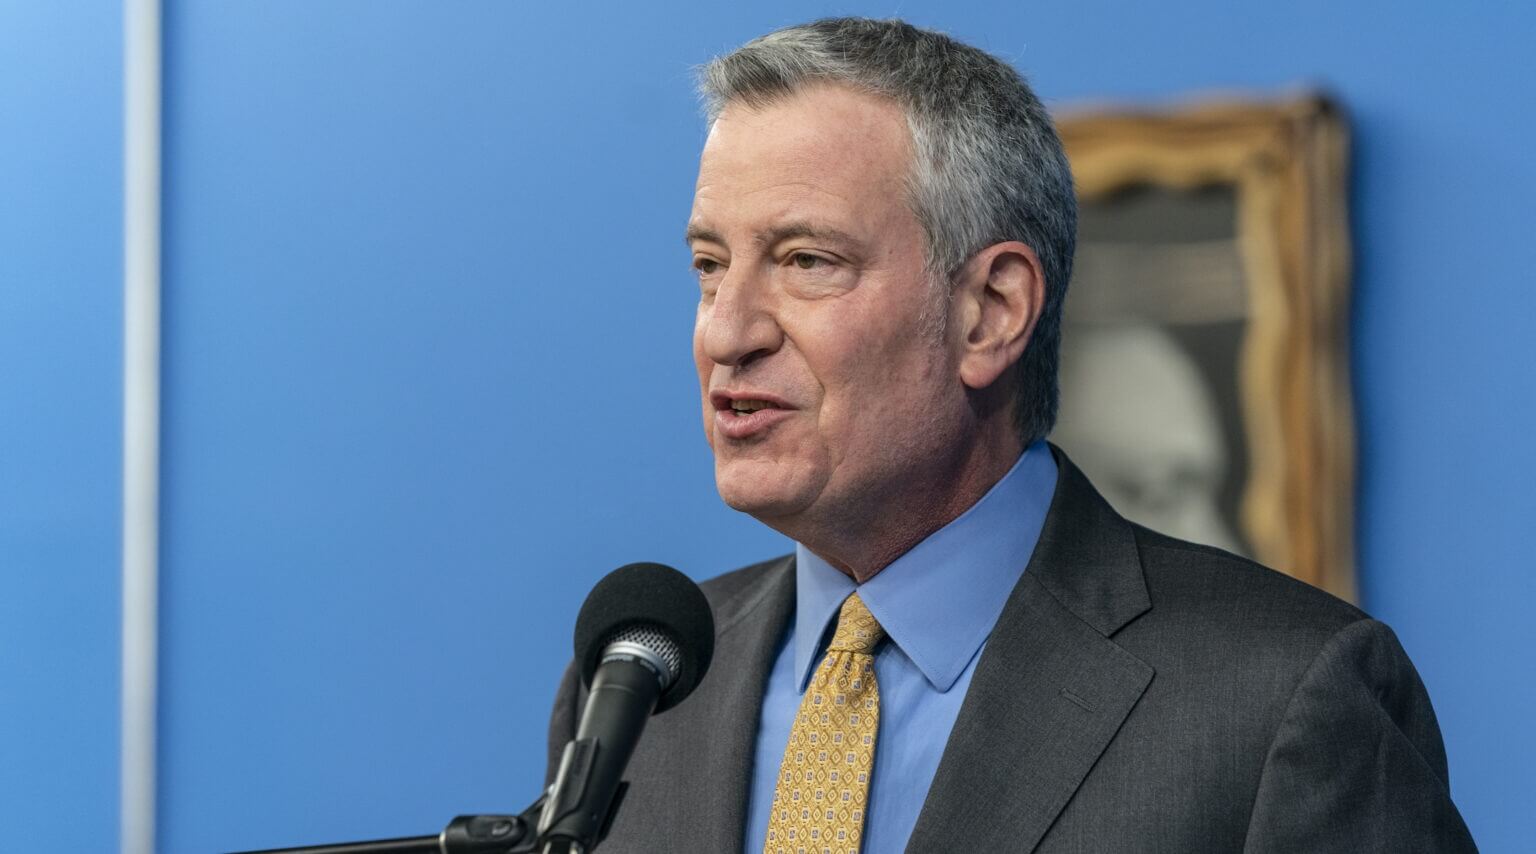 Bill de Blasio, during his second term as New York City mayor, speaks during a Martin Luther King Day celebration in the city, Jan. 18, 2021.